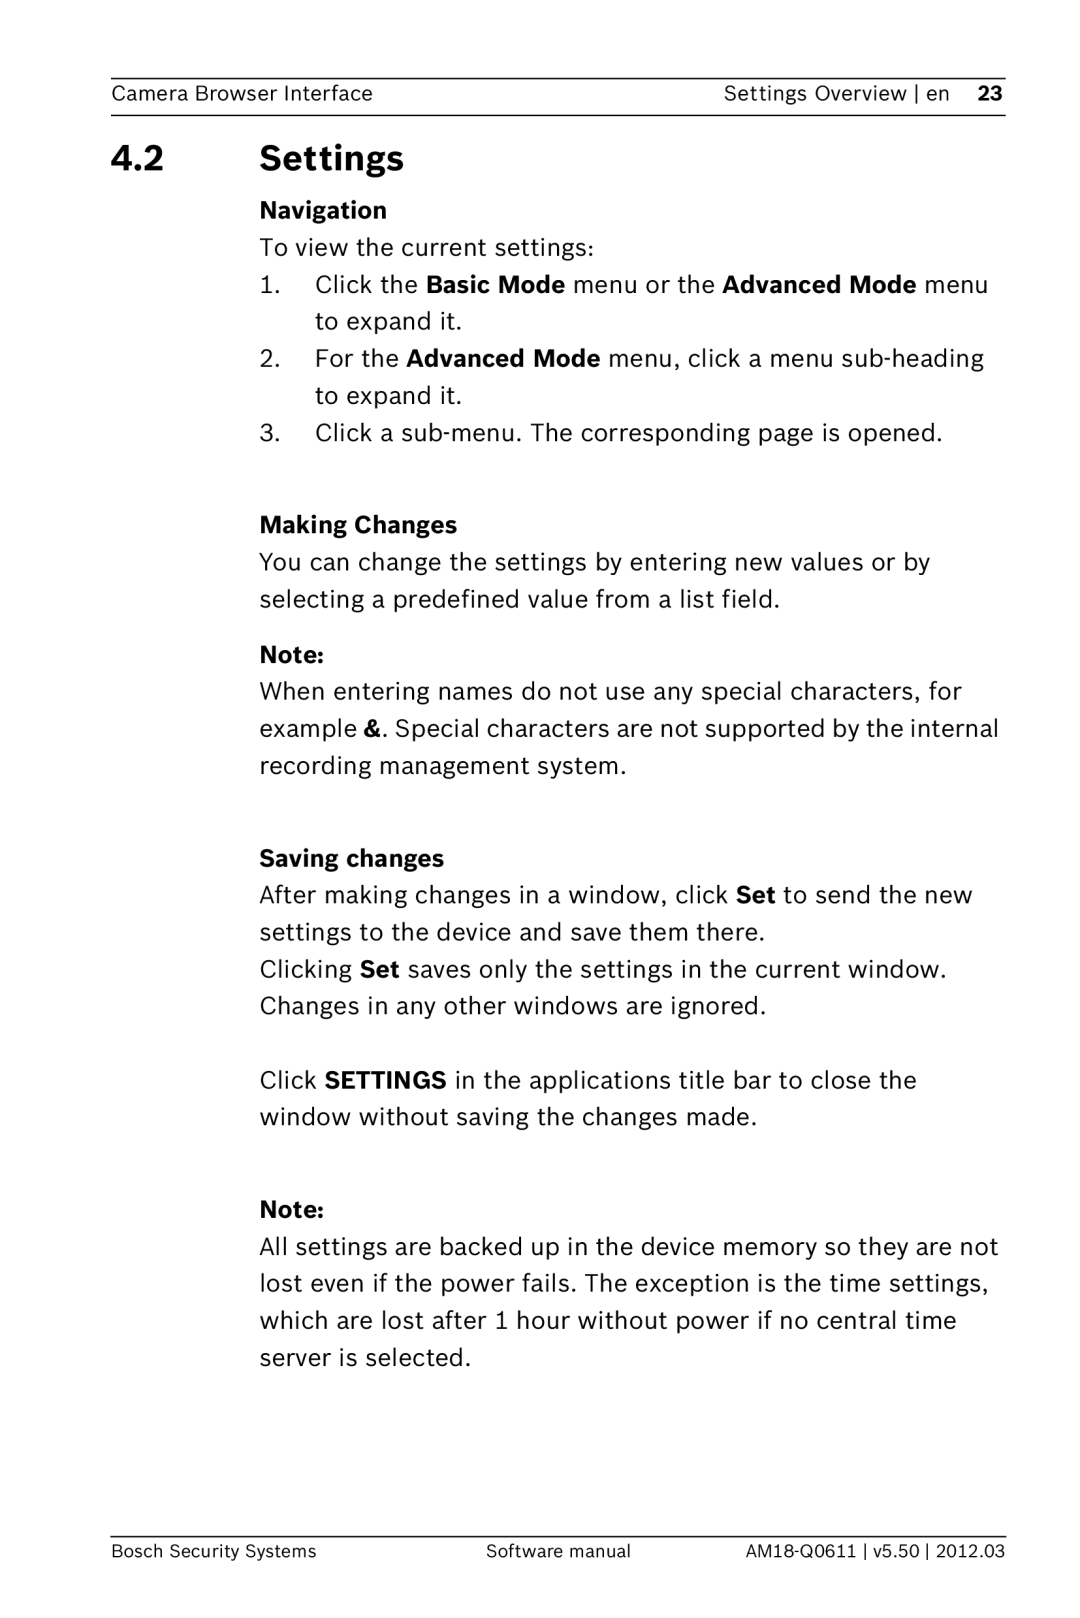 Bosch Appliances FW5.50 software manual 4.2Settings, Navigation, Making Changes, Saving changes 